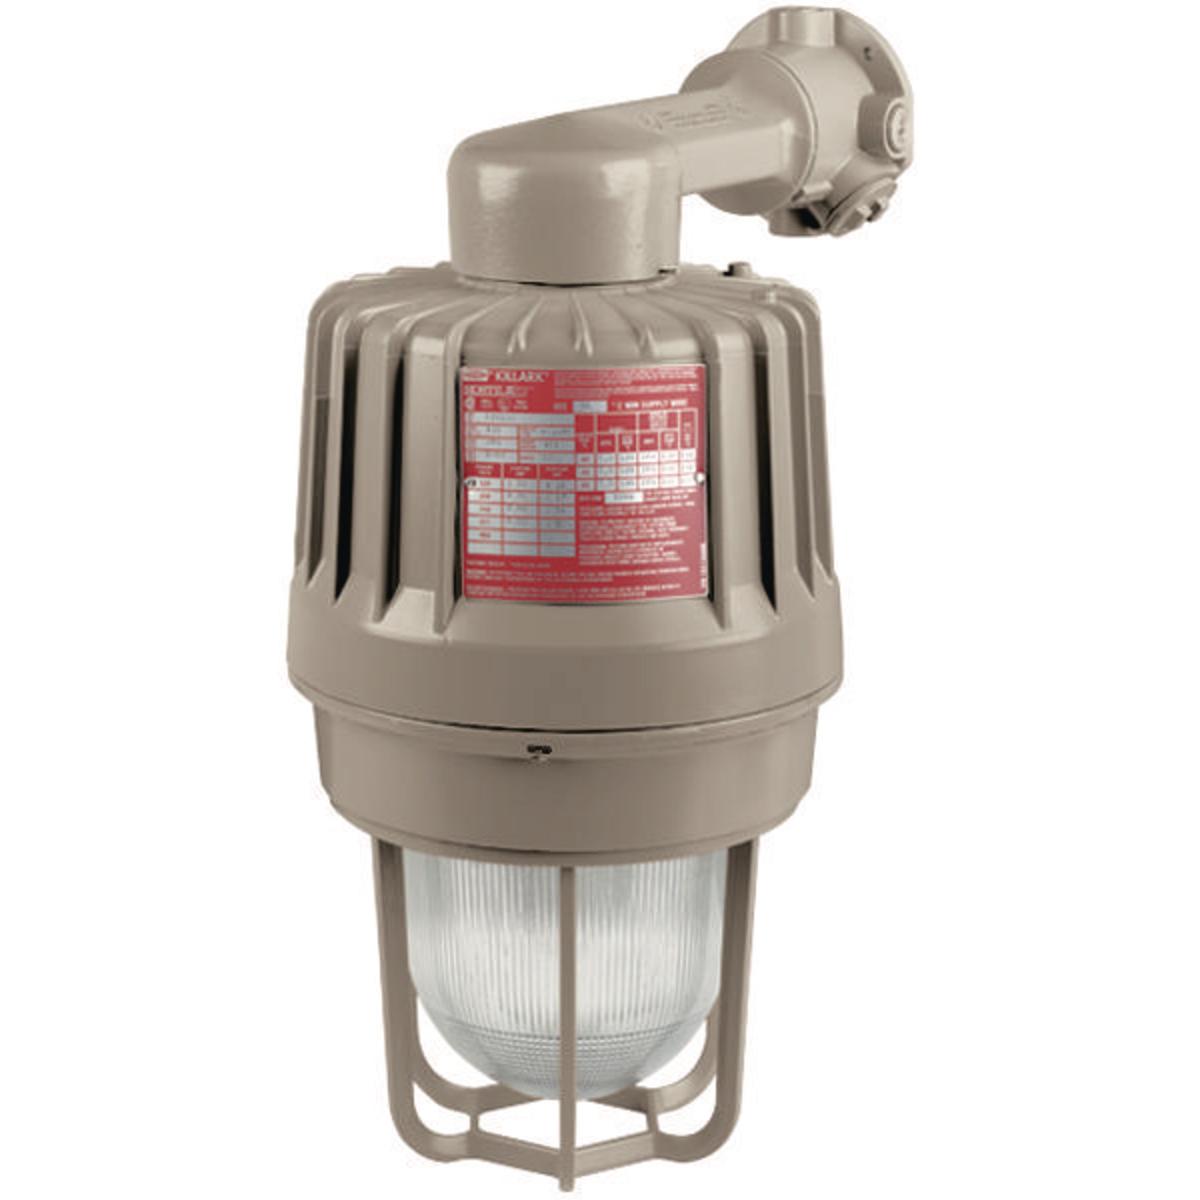 Hubbell EZP170B2G 175W Quadri-Volt Metal Halide 3/4" Wall Mount wirh Guard  ; Three light sources – High Pressure Sodium (50-400W), Metal Halide (70-400W) and Pulse Start Metal Halide (175-400W) ; Mounting choice –Pendant, ceiling, 25˚ stanchion or 90˚ wall mount, all with